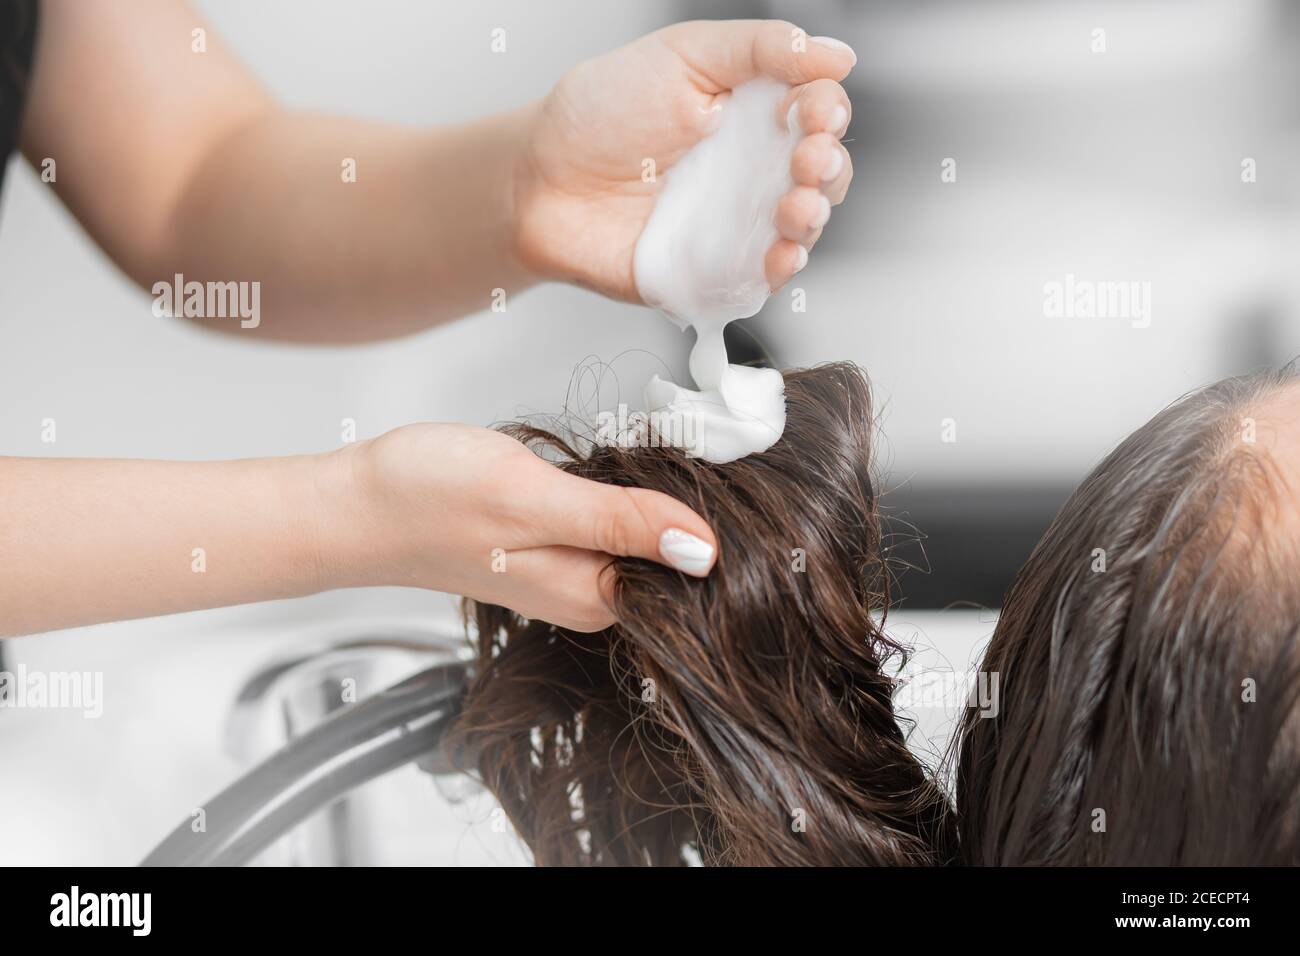 Hairdresser applies shampoo and hair conditioner client head. Concept spa  beauty salon Stock Photo - Alamy